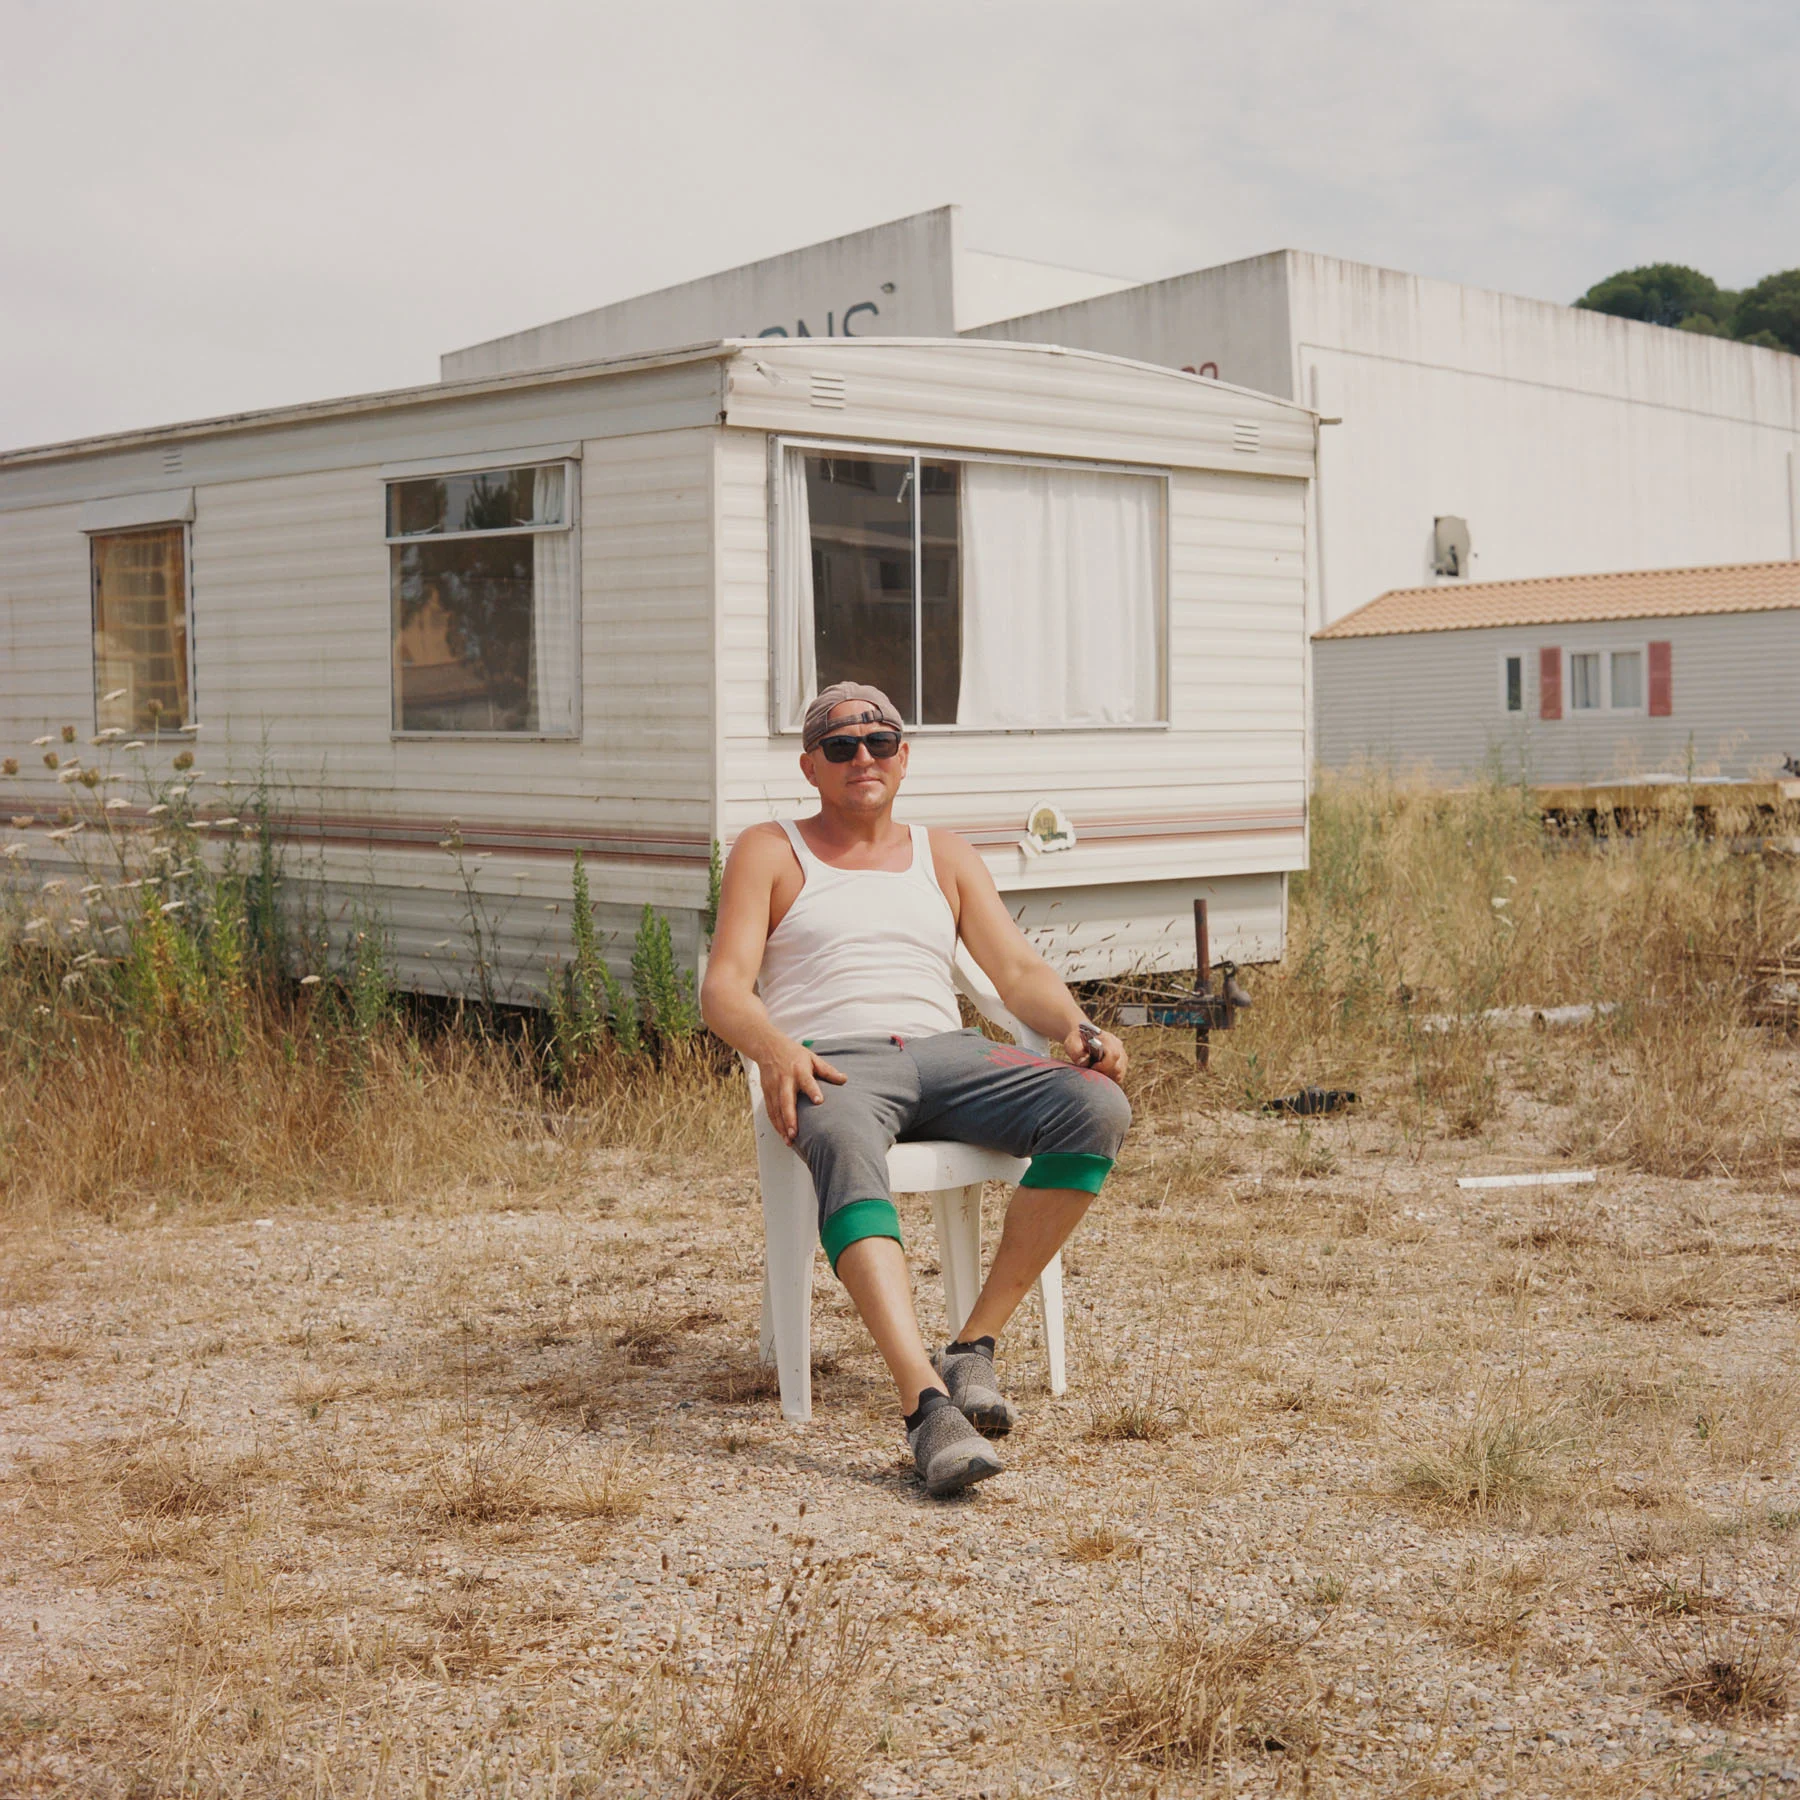 A photograph of a man sitting in a plastic white chair looking at the camera. The man is wearing pants, a white shirt and a cap. An abandoned mobile home lies in the background surrounded by white flowers and vegetation.